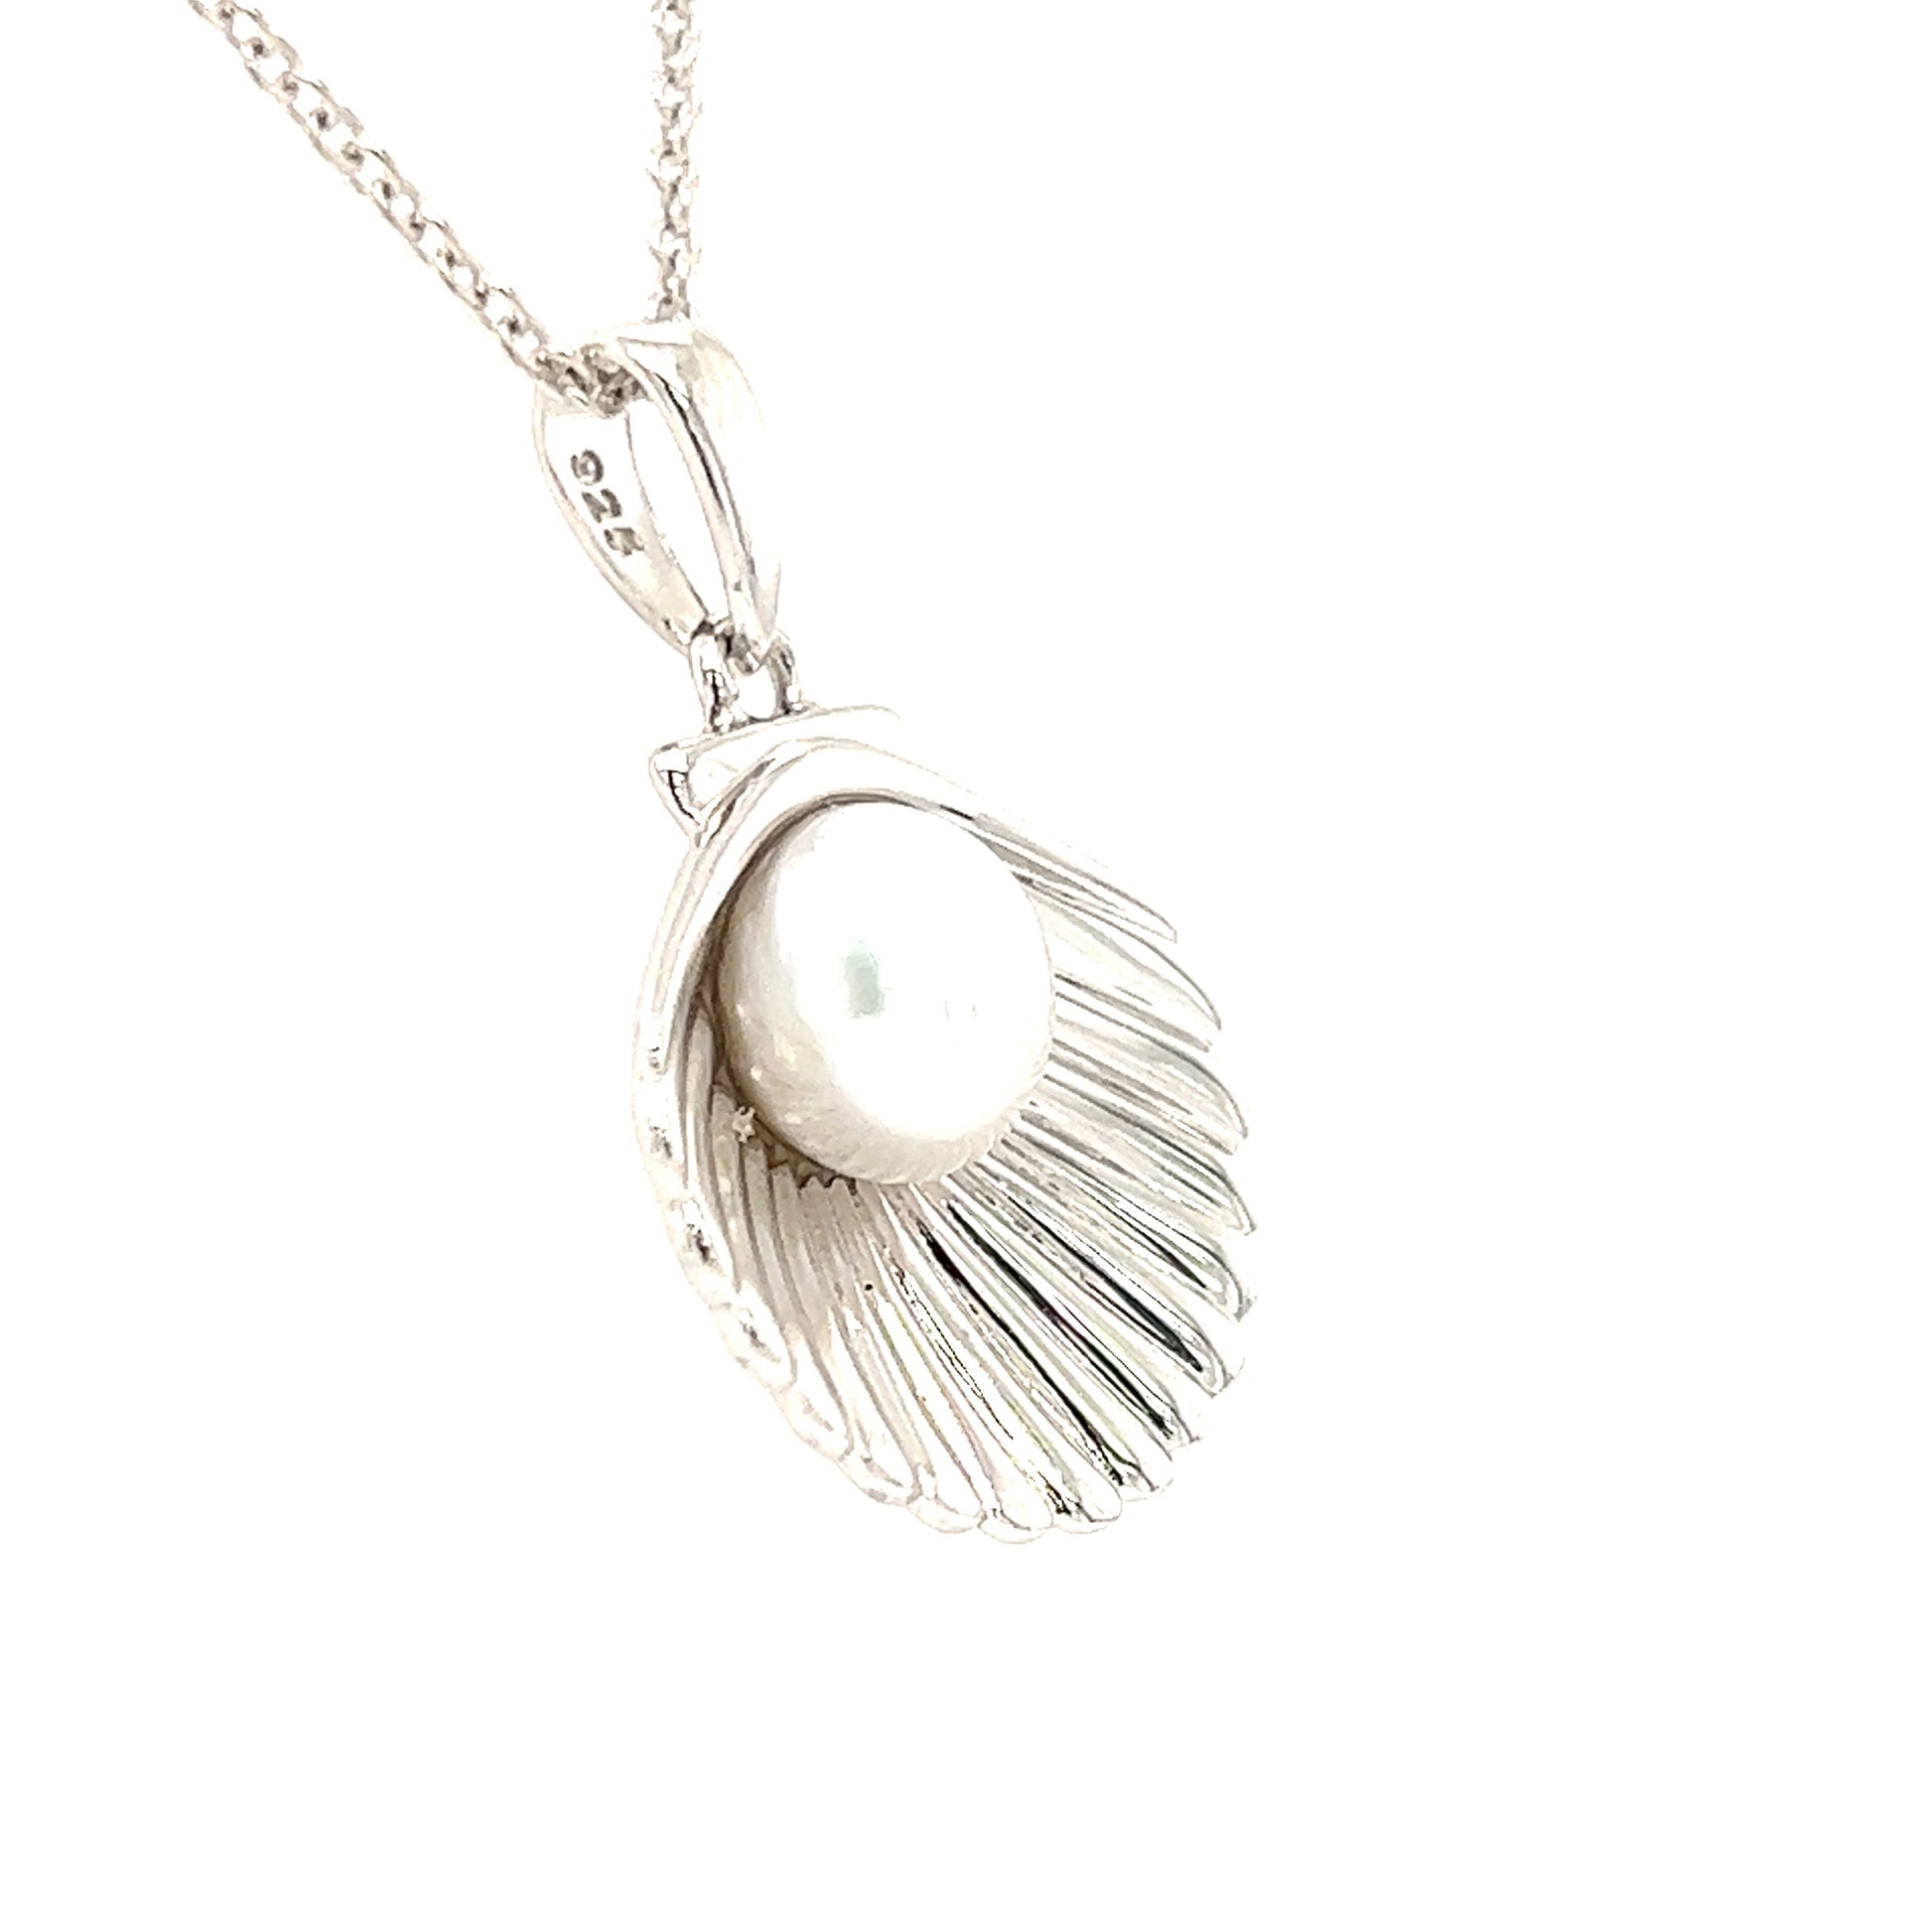 Shell Necklace with White Pearl in Sterling Silver Pendant Right Side View